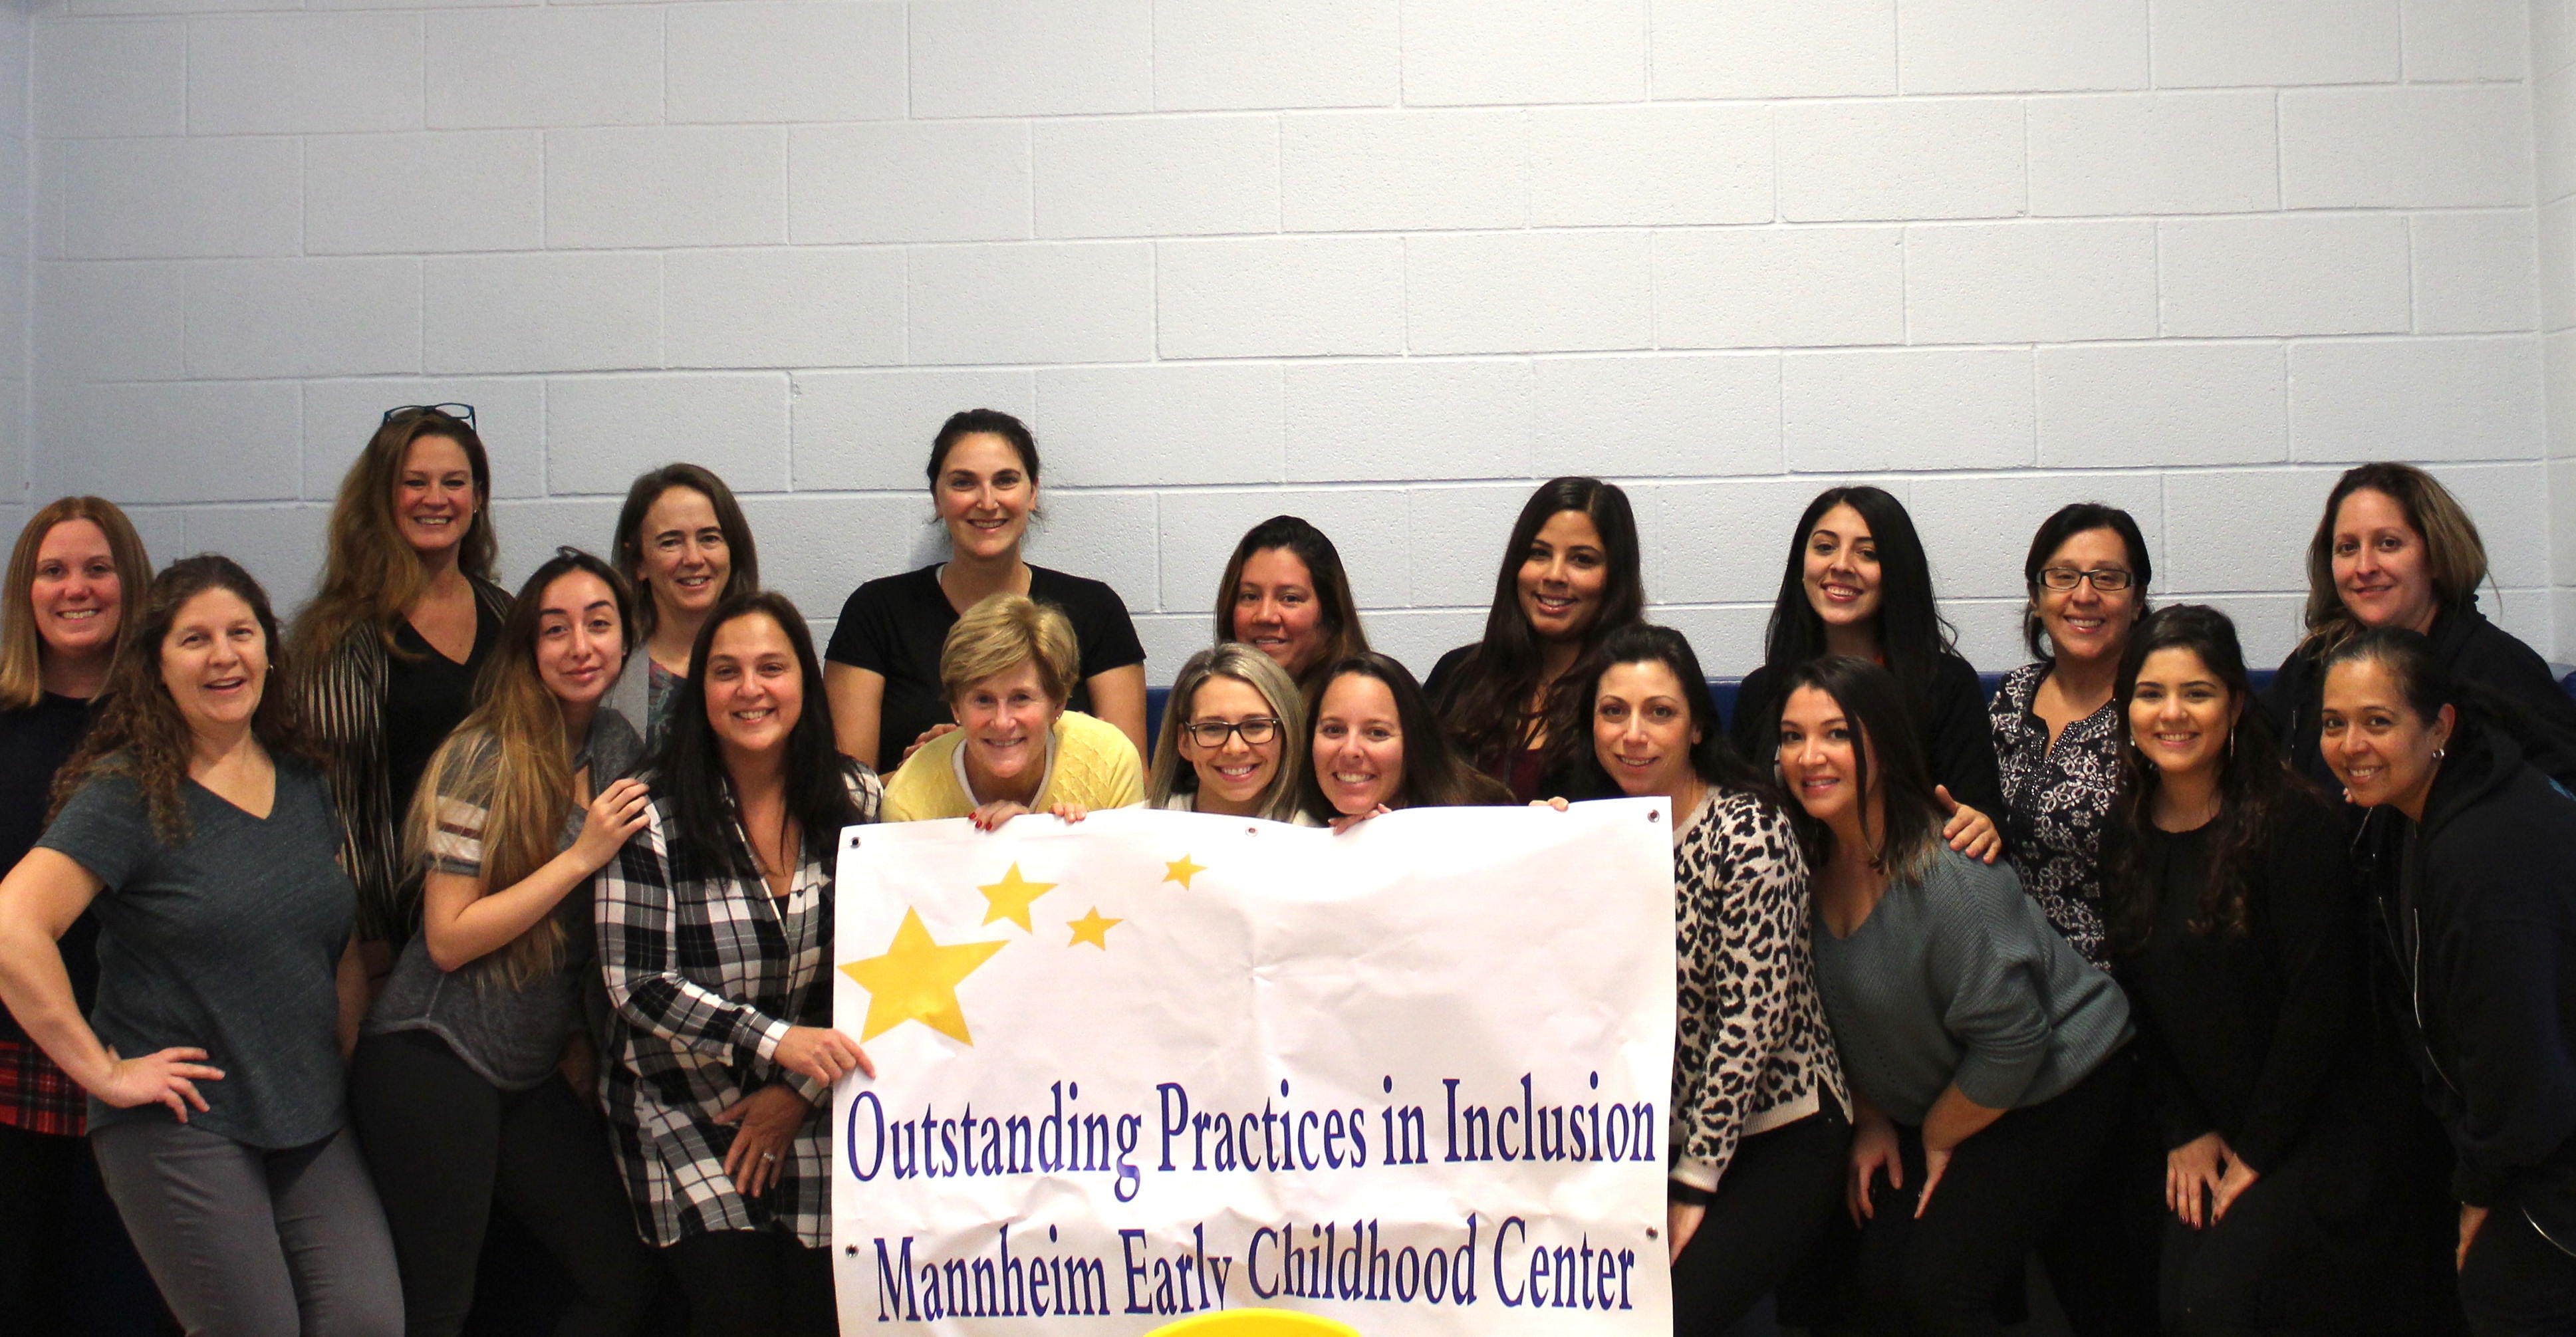 MECC staff posing with Outstanding Practices in Inclusion banner